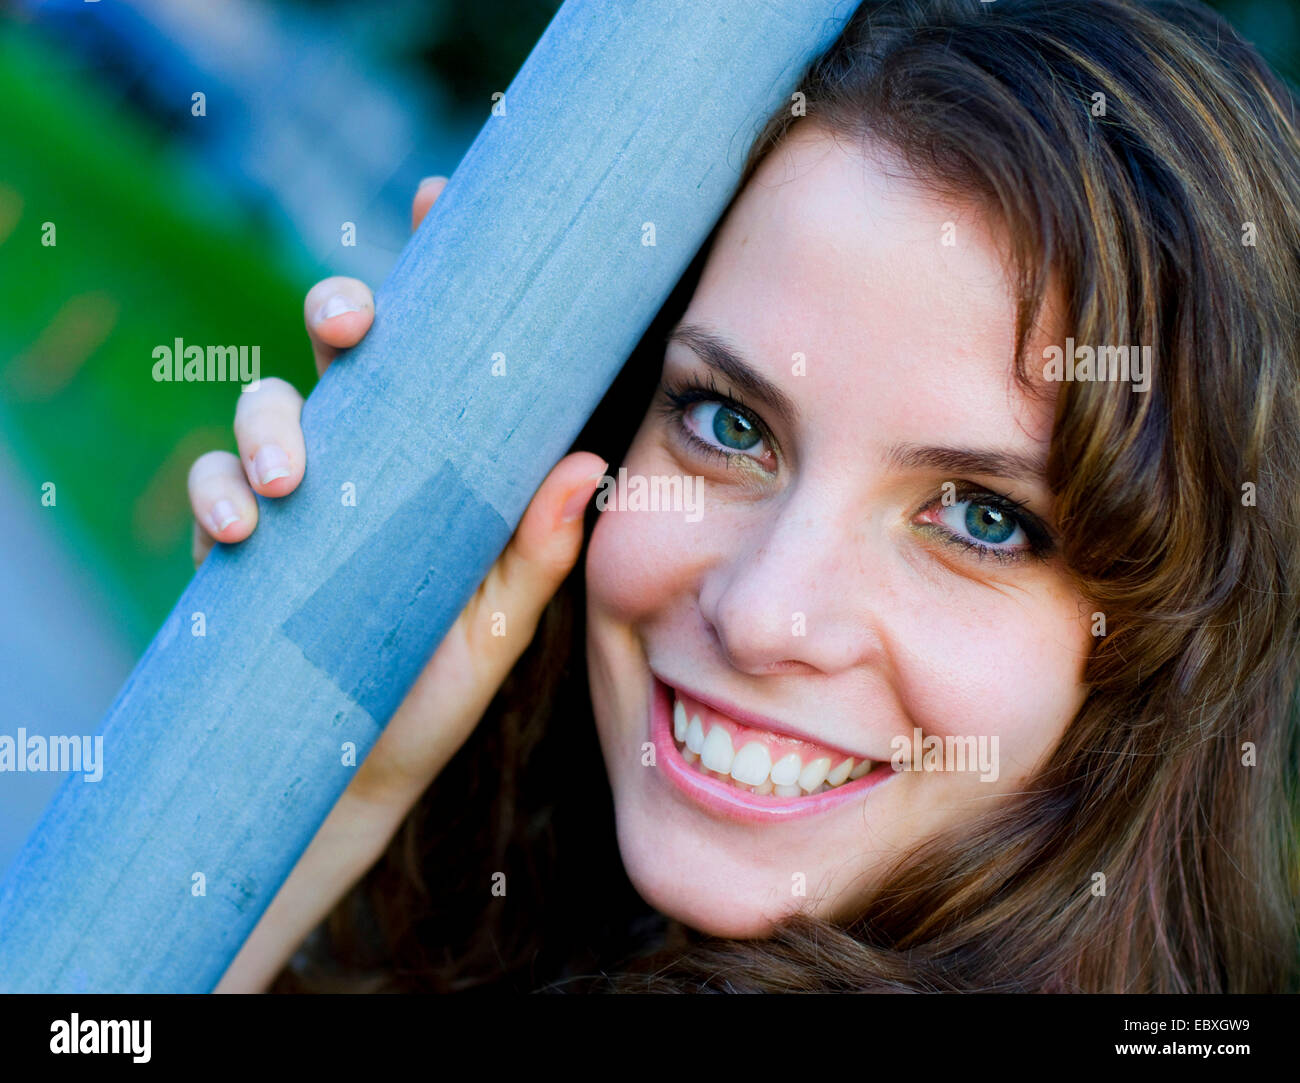 cute brown-haired woman smiling Stock Photo